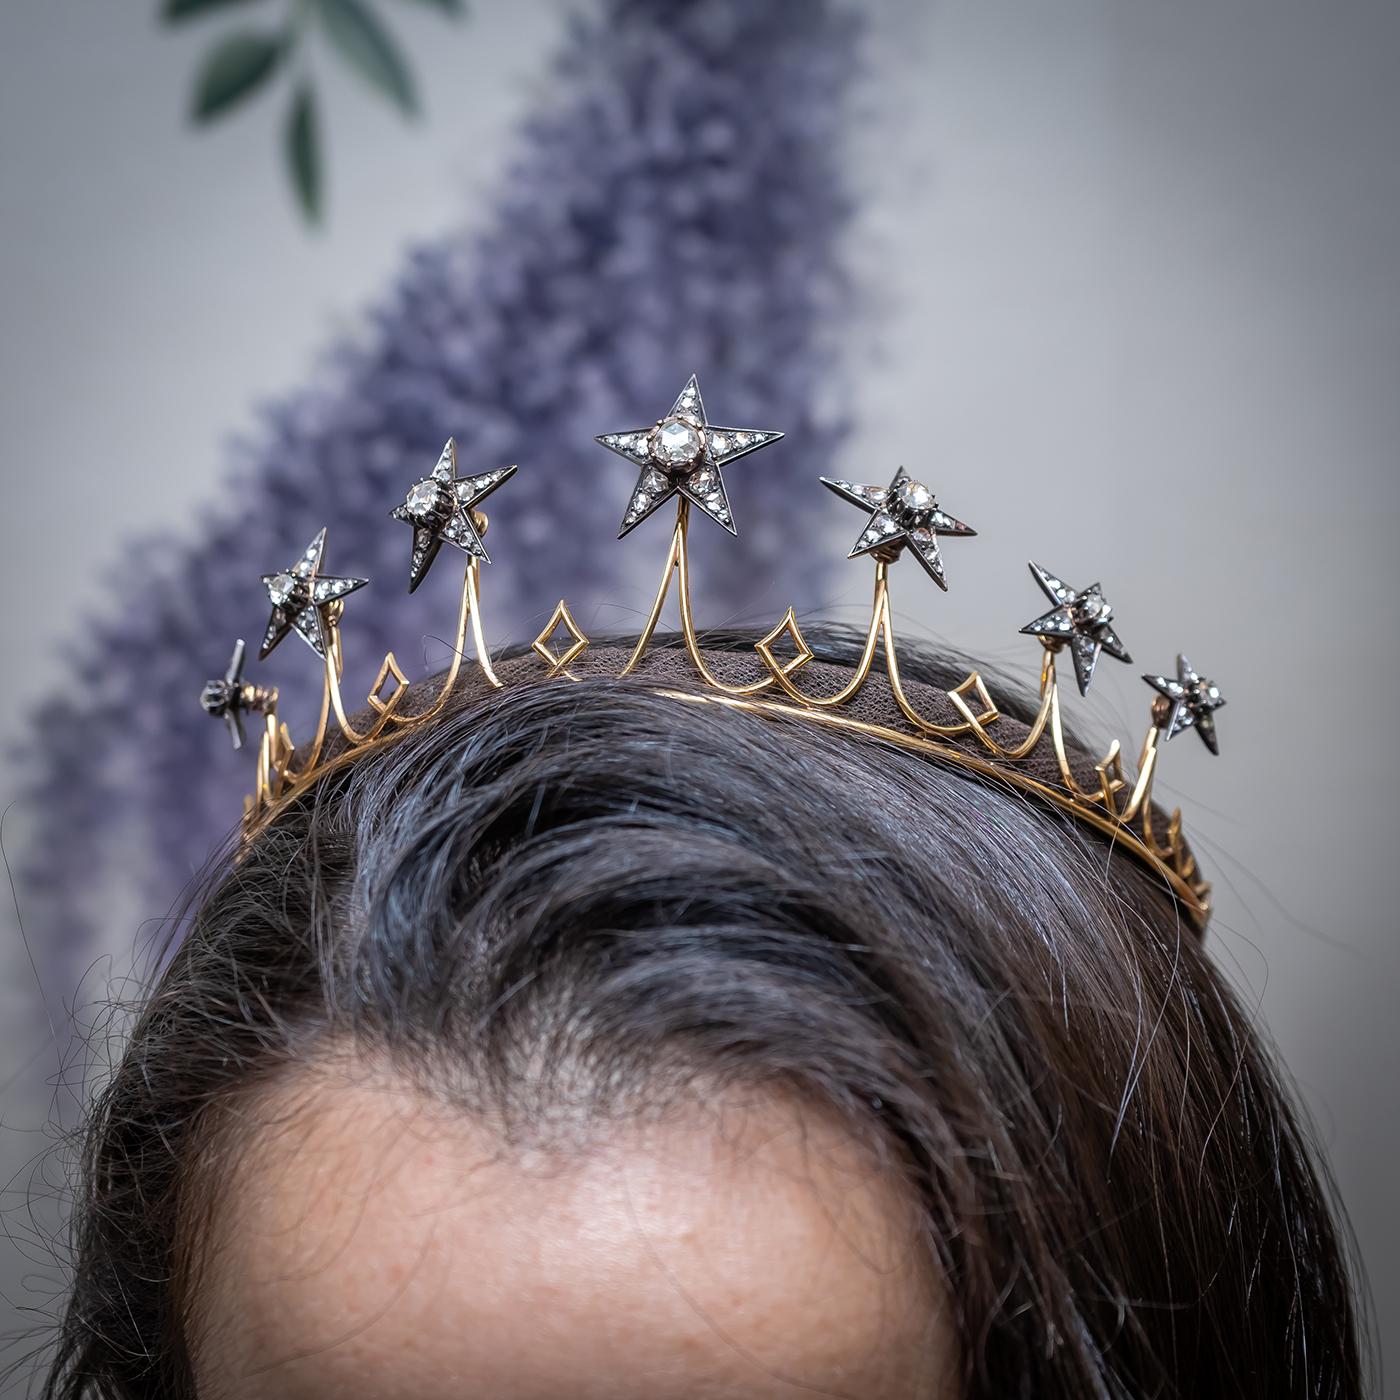 A mid-Victorian diamond tiara, comprising seven, rose-cut diamond set, en tremblant stars, mounted in silver-upon-gold, set with approximately 8.00ct of diamonds, on a gold frame. The stars are detachable and could be used for hair pins, or